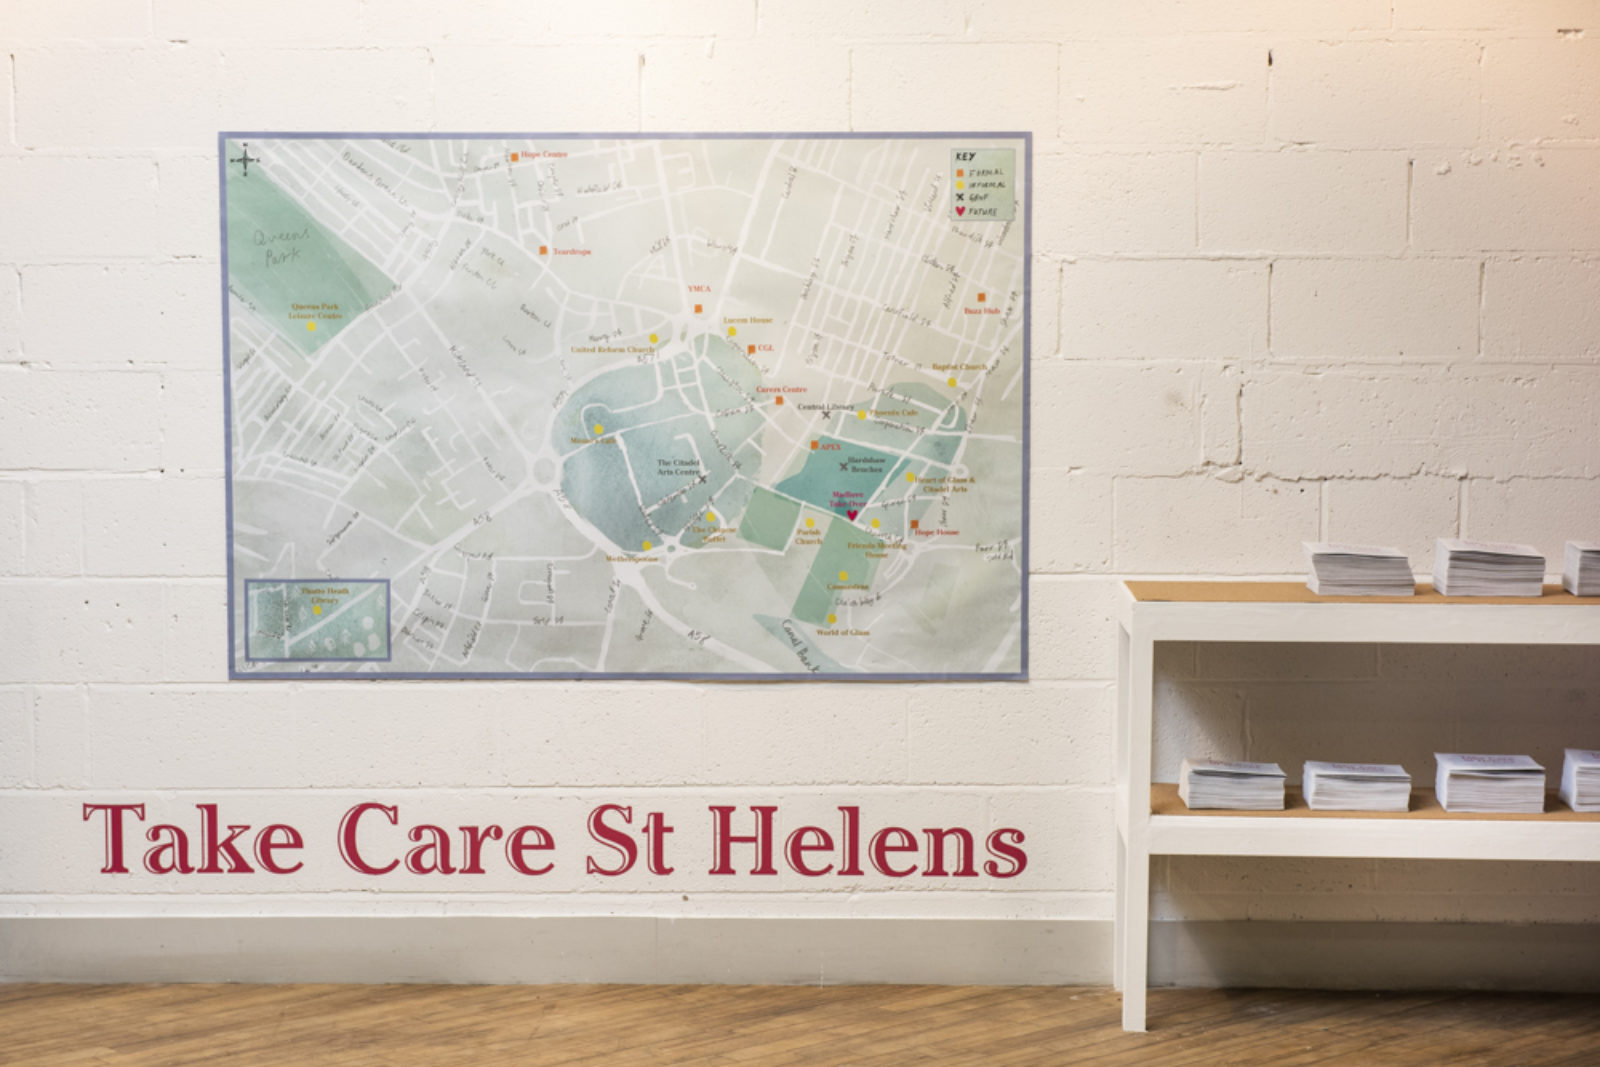 A large map hangs on a wall with a low set of shelves next to it with leaflets on top. Underneath the map the words 'Take Care St Helens' are printed in large red letters.